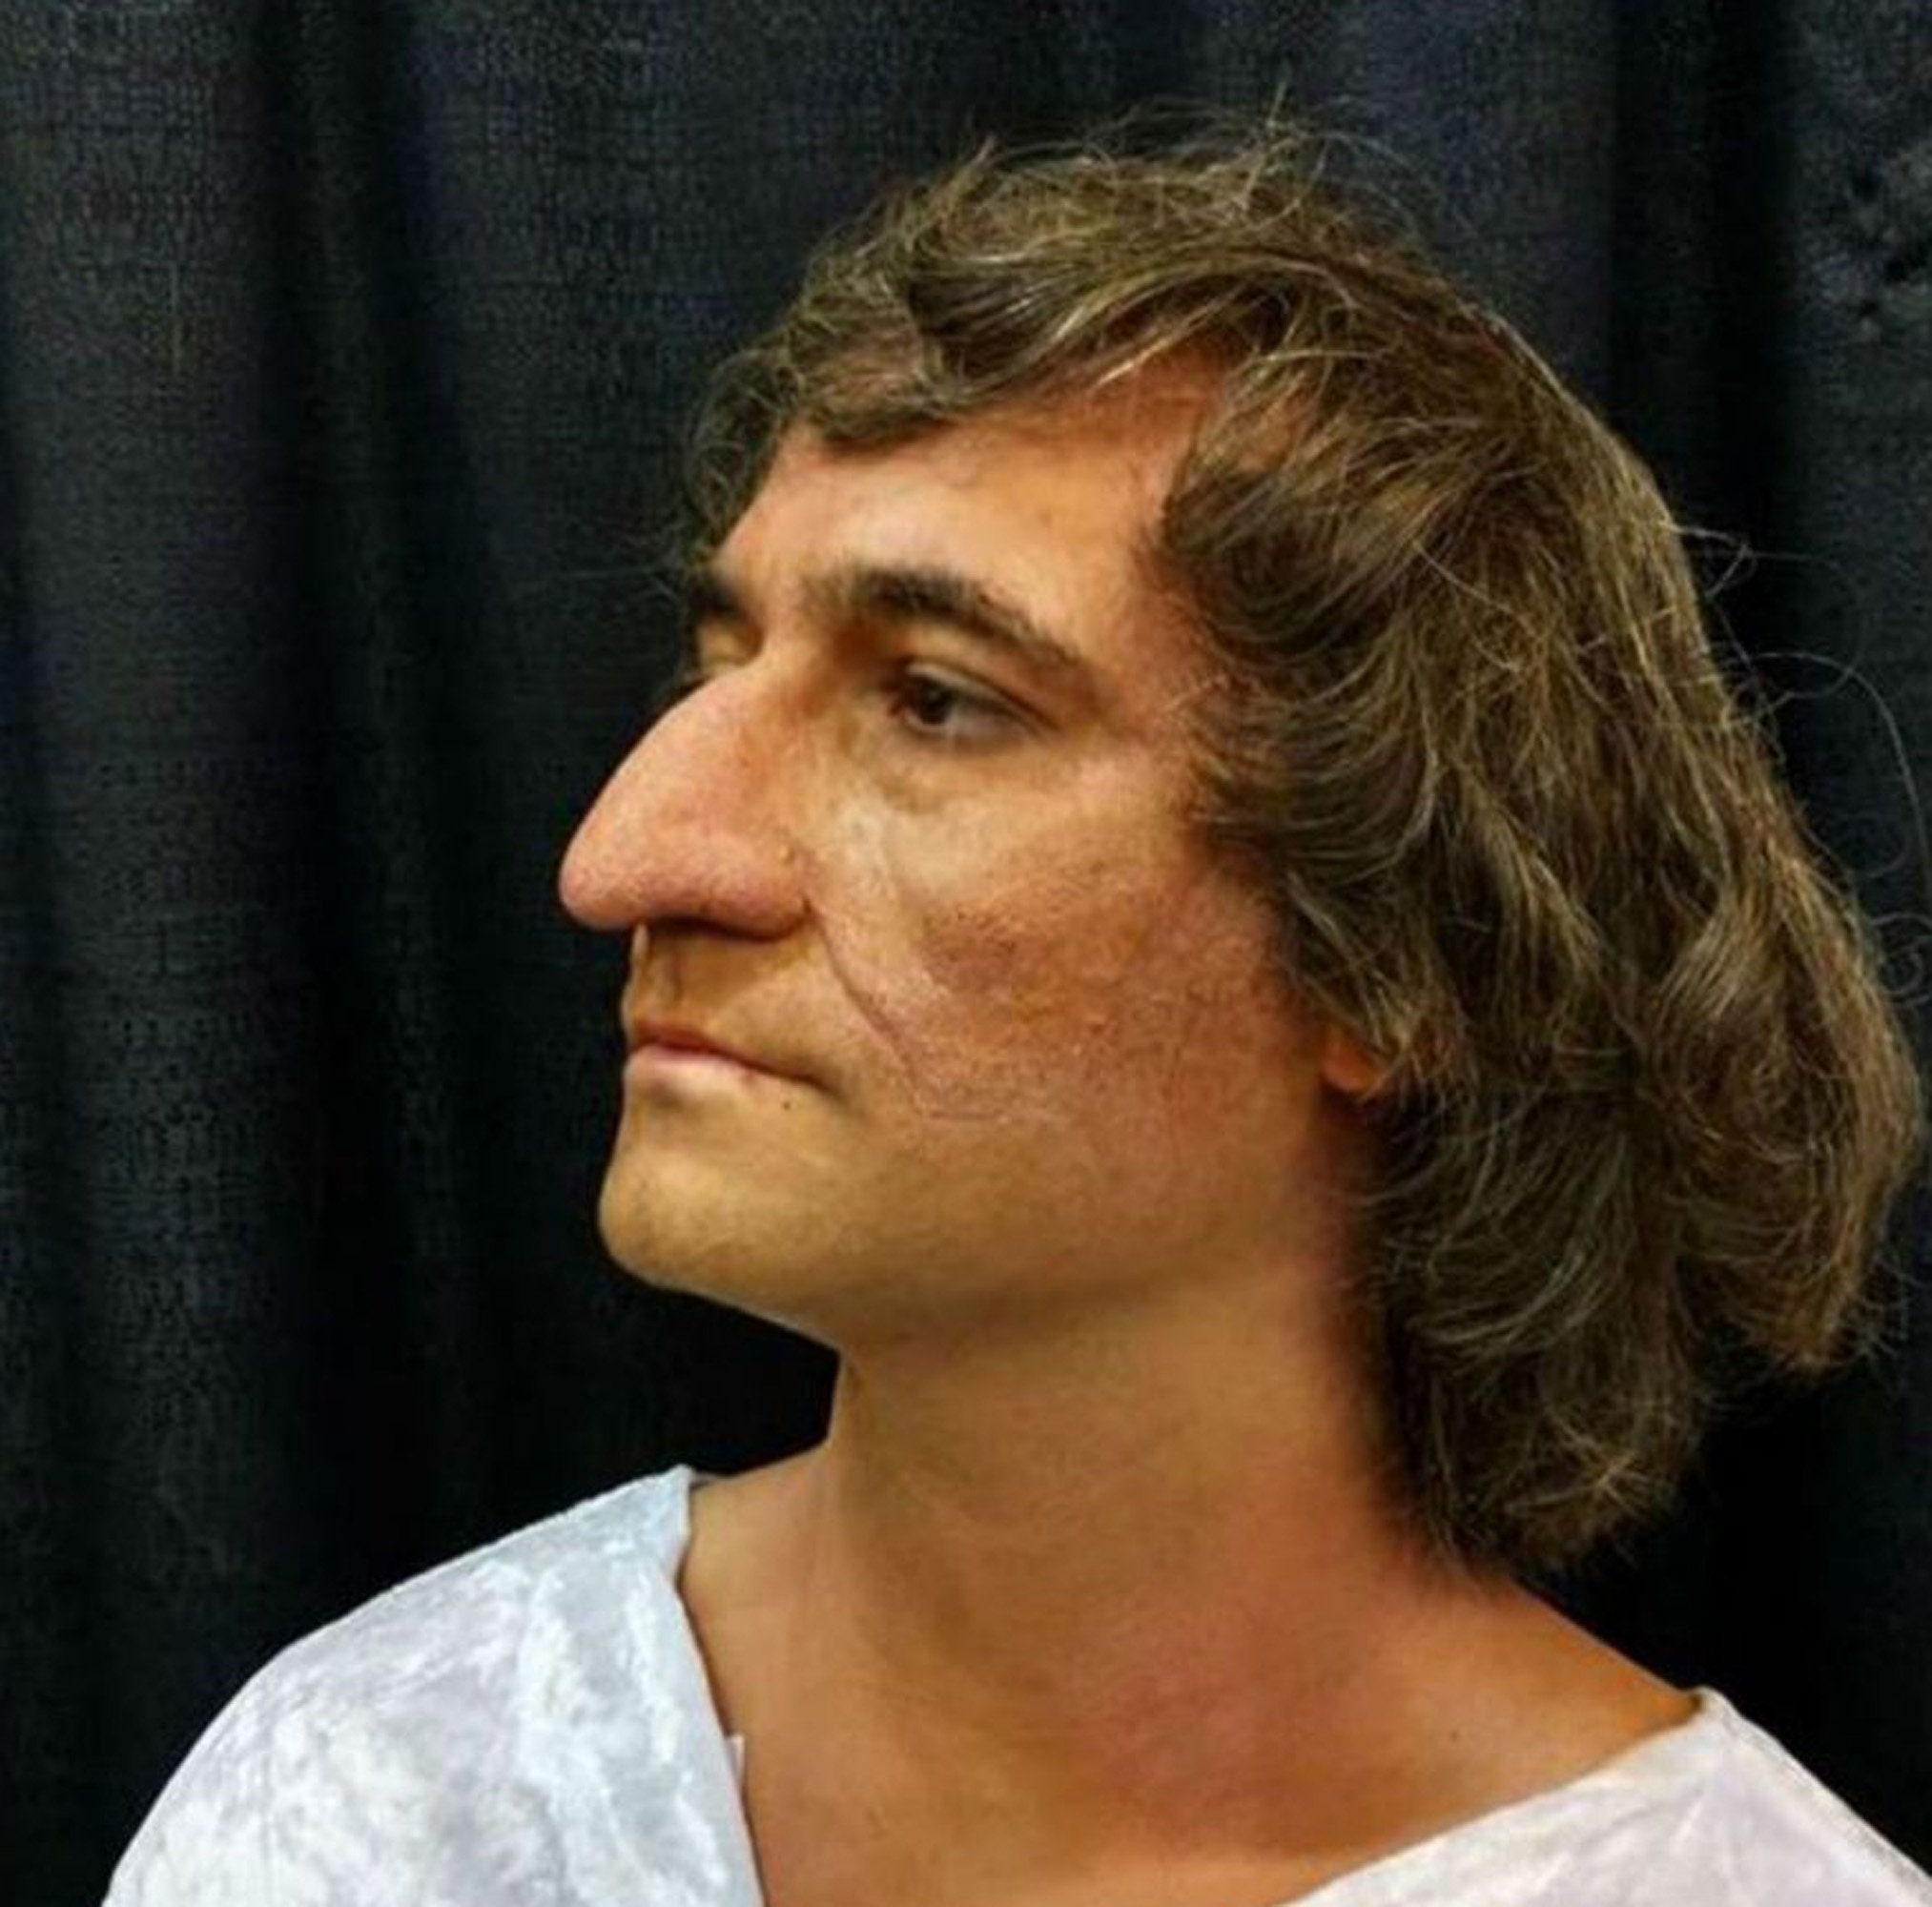 Prosthetic Nose -  Canada